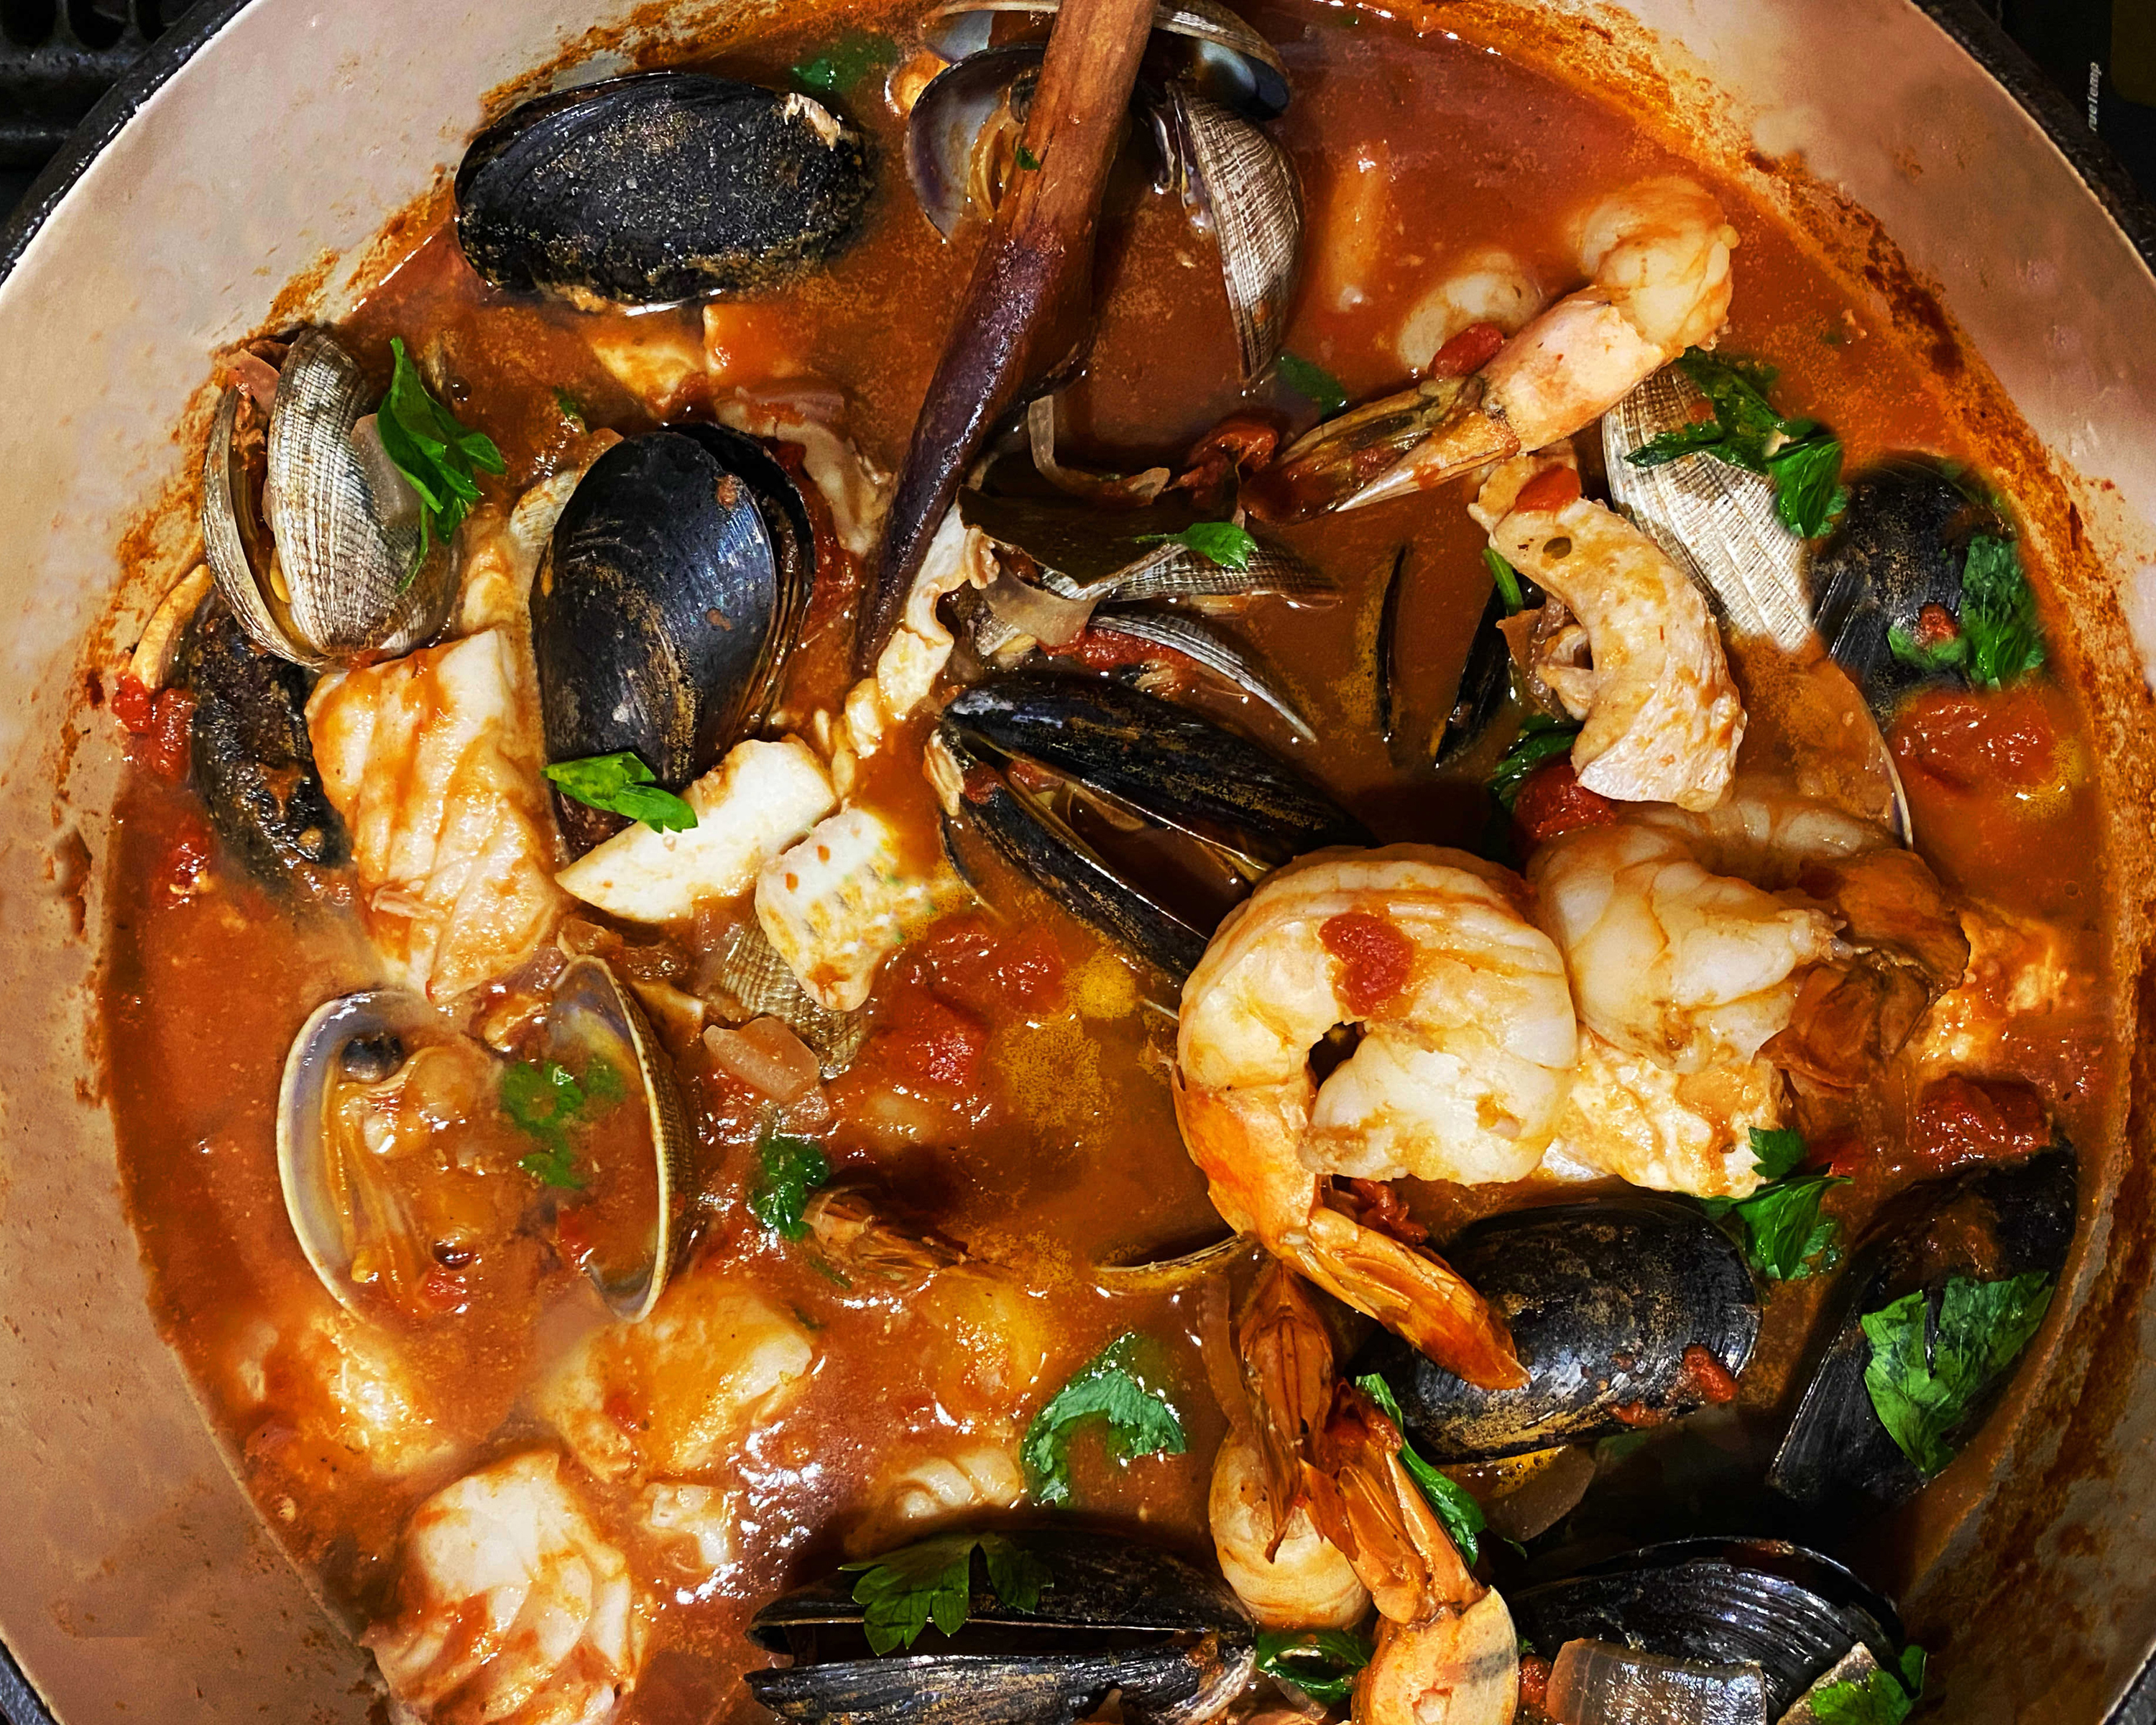 Cioppino is a San Francisco seafood stew that originated in the 1800s when the Italian and Portuguese fishermen chopped up leftovers from their daily catches to make a robust tomato-based soup.